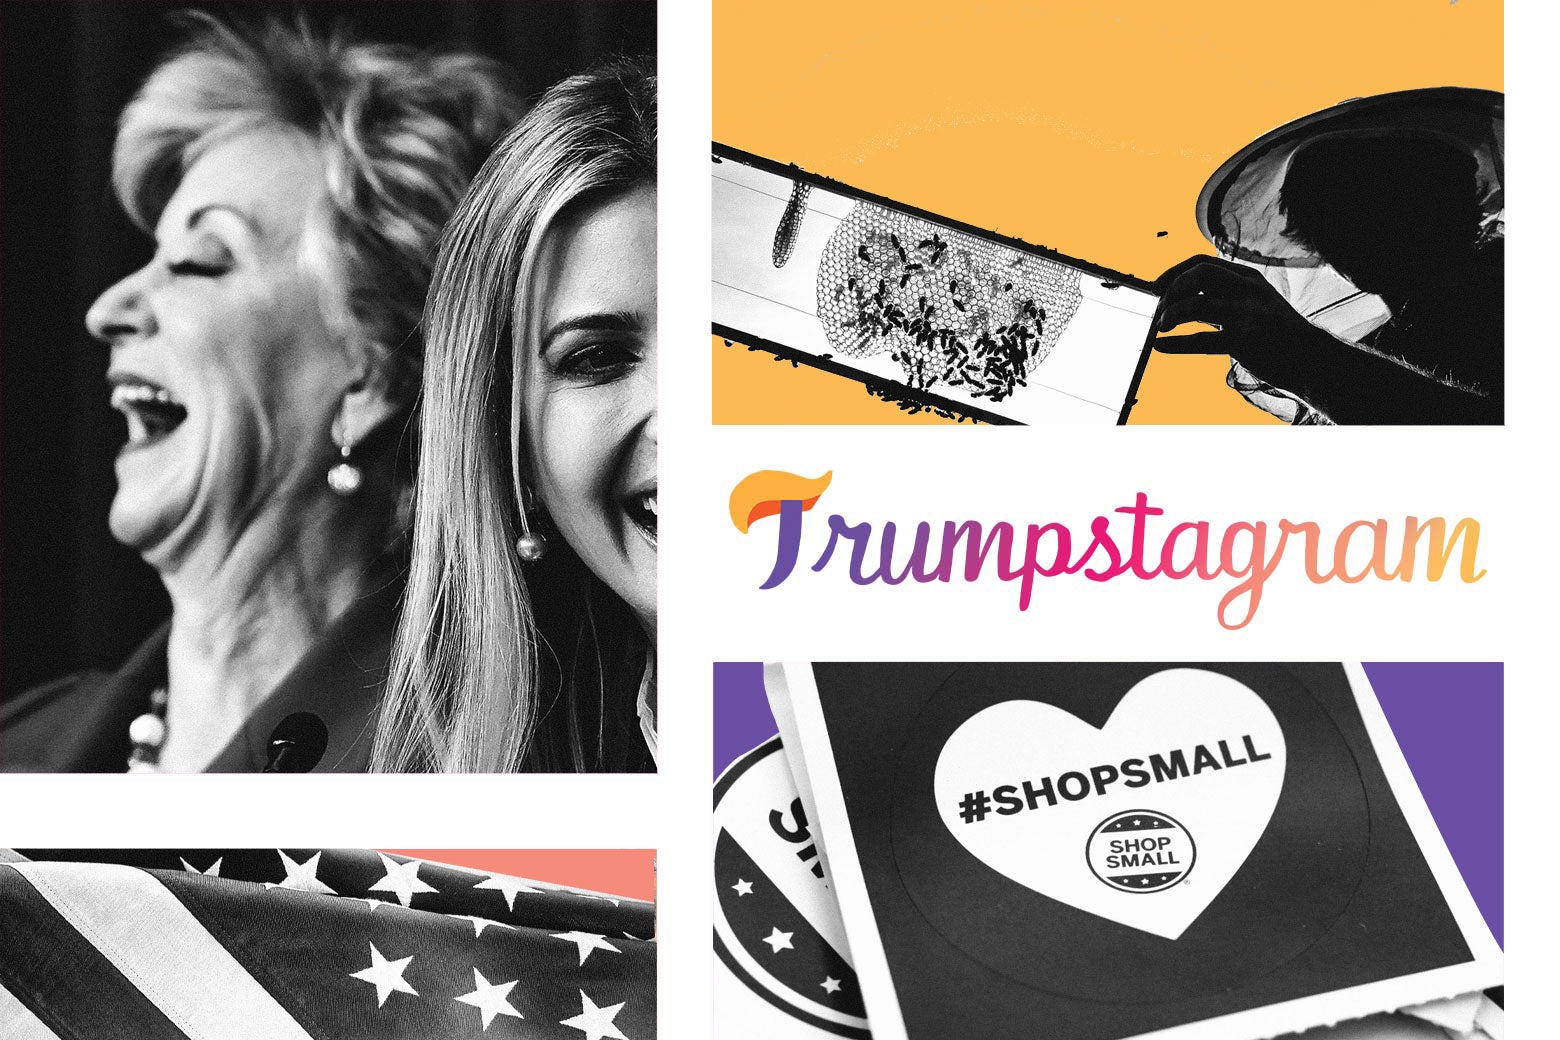 Clockwise from top left, Linda McMahon laughing, bees, Trumpstagram logo, a piece of paper that says "Shop Small," and an American flag.